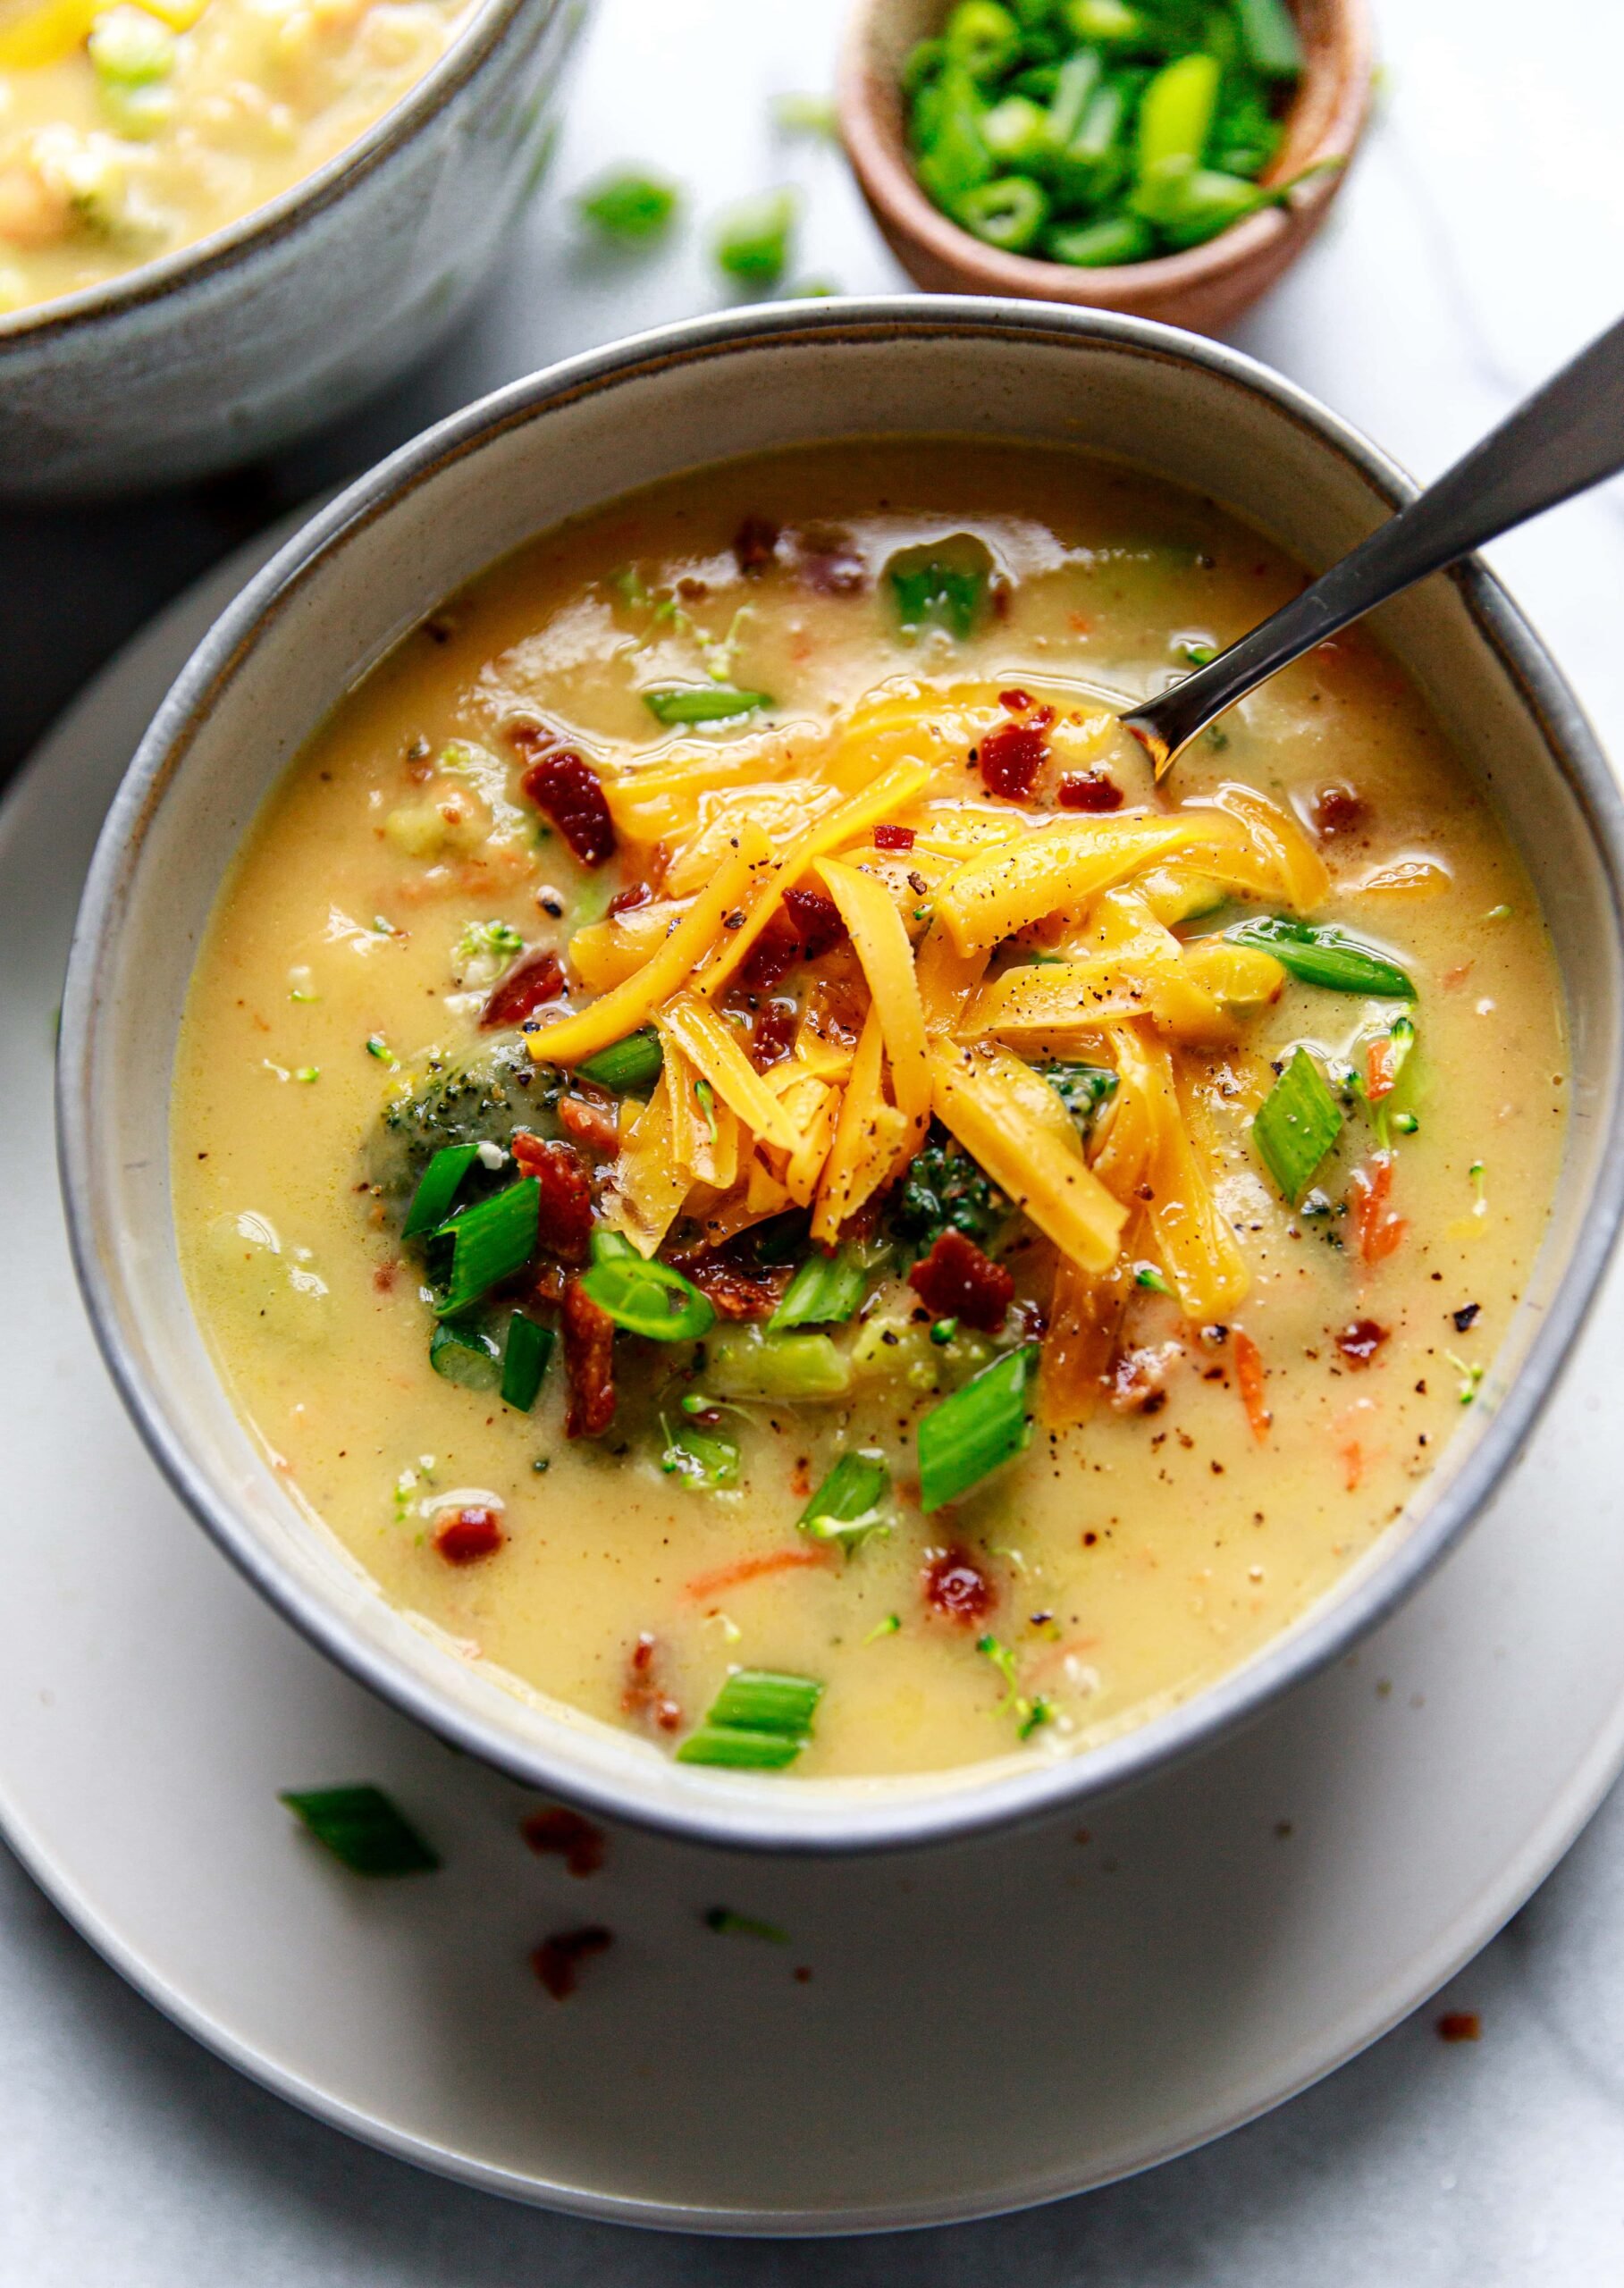 Healthy Broccoli Cheddar Soup - All the Healthy Things